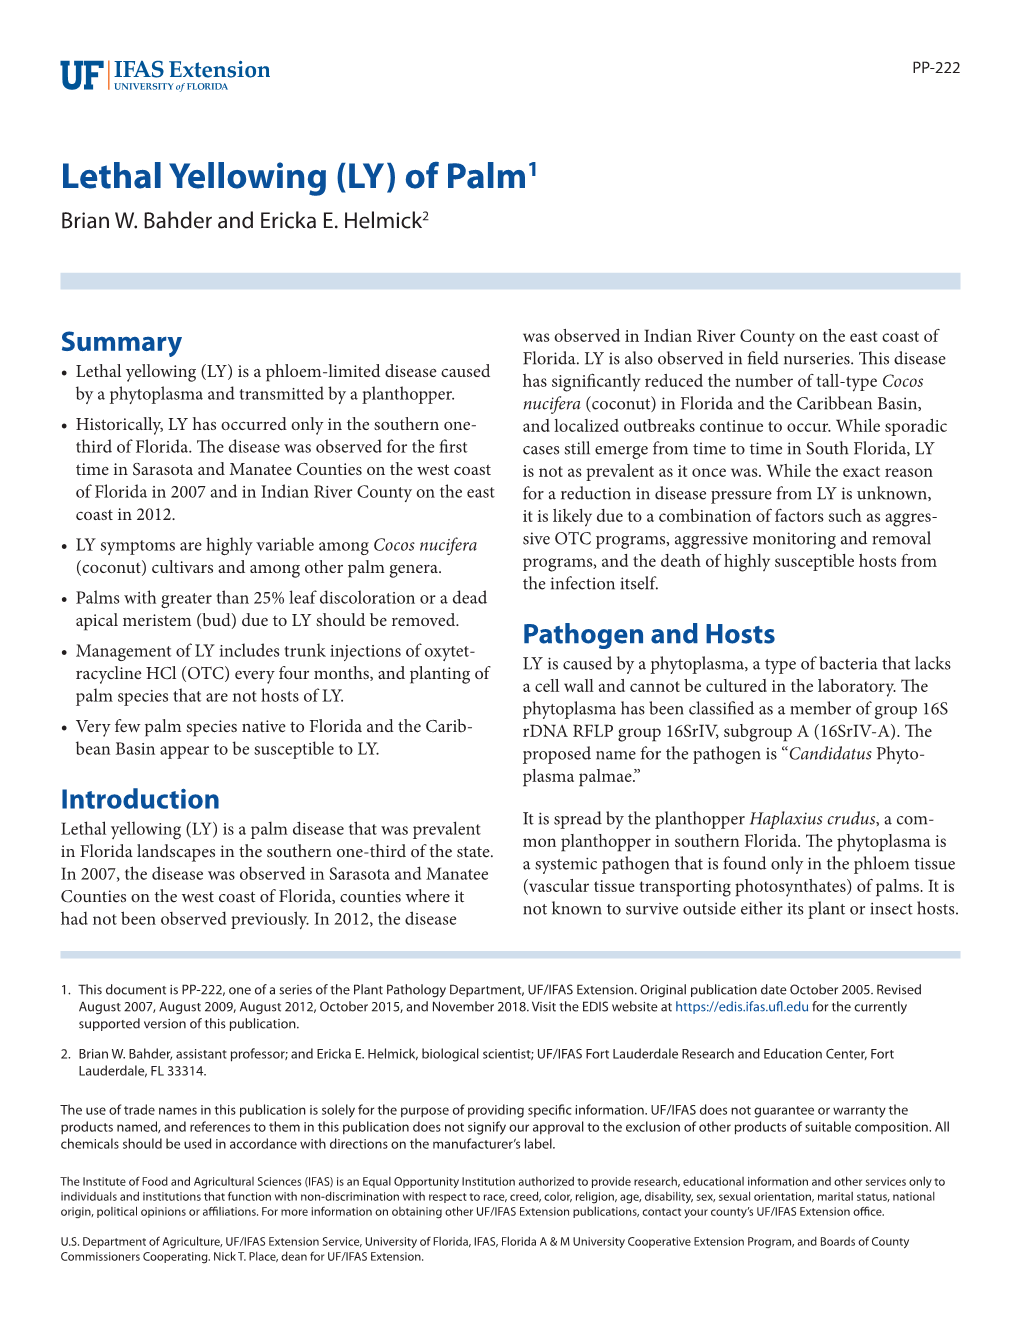 Lethal Yellowing (LY) of Palm1 Brian W